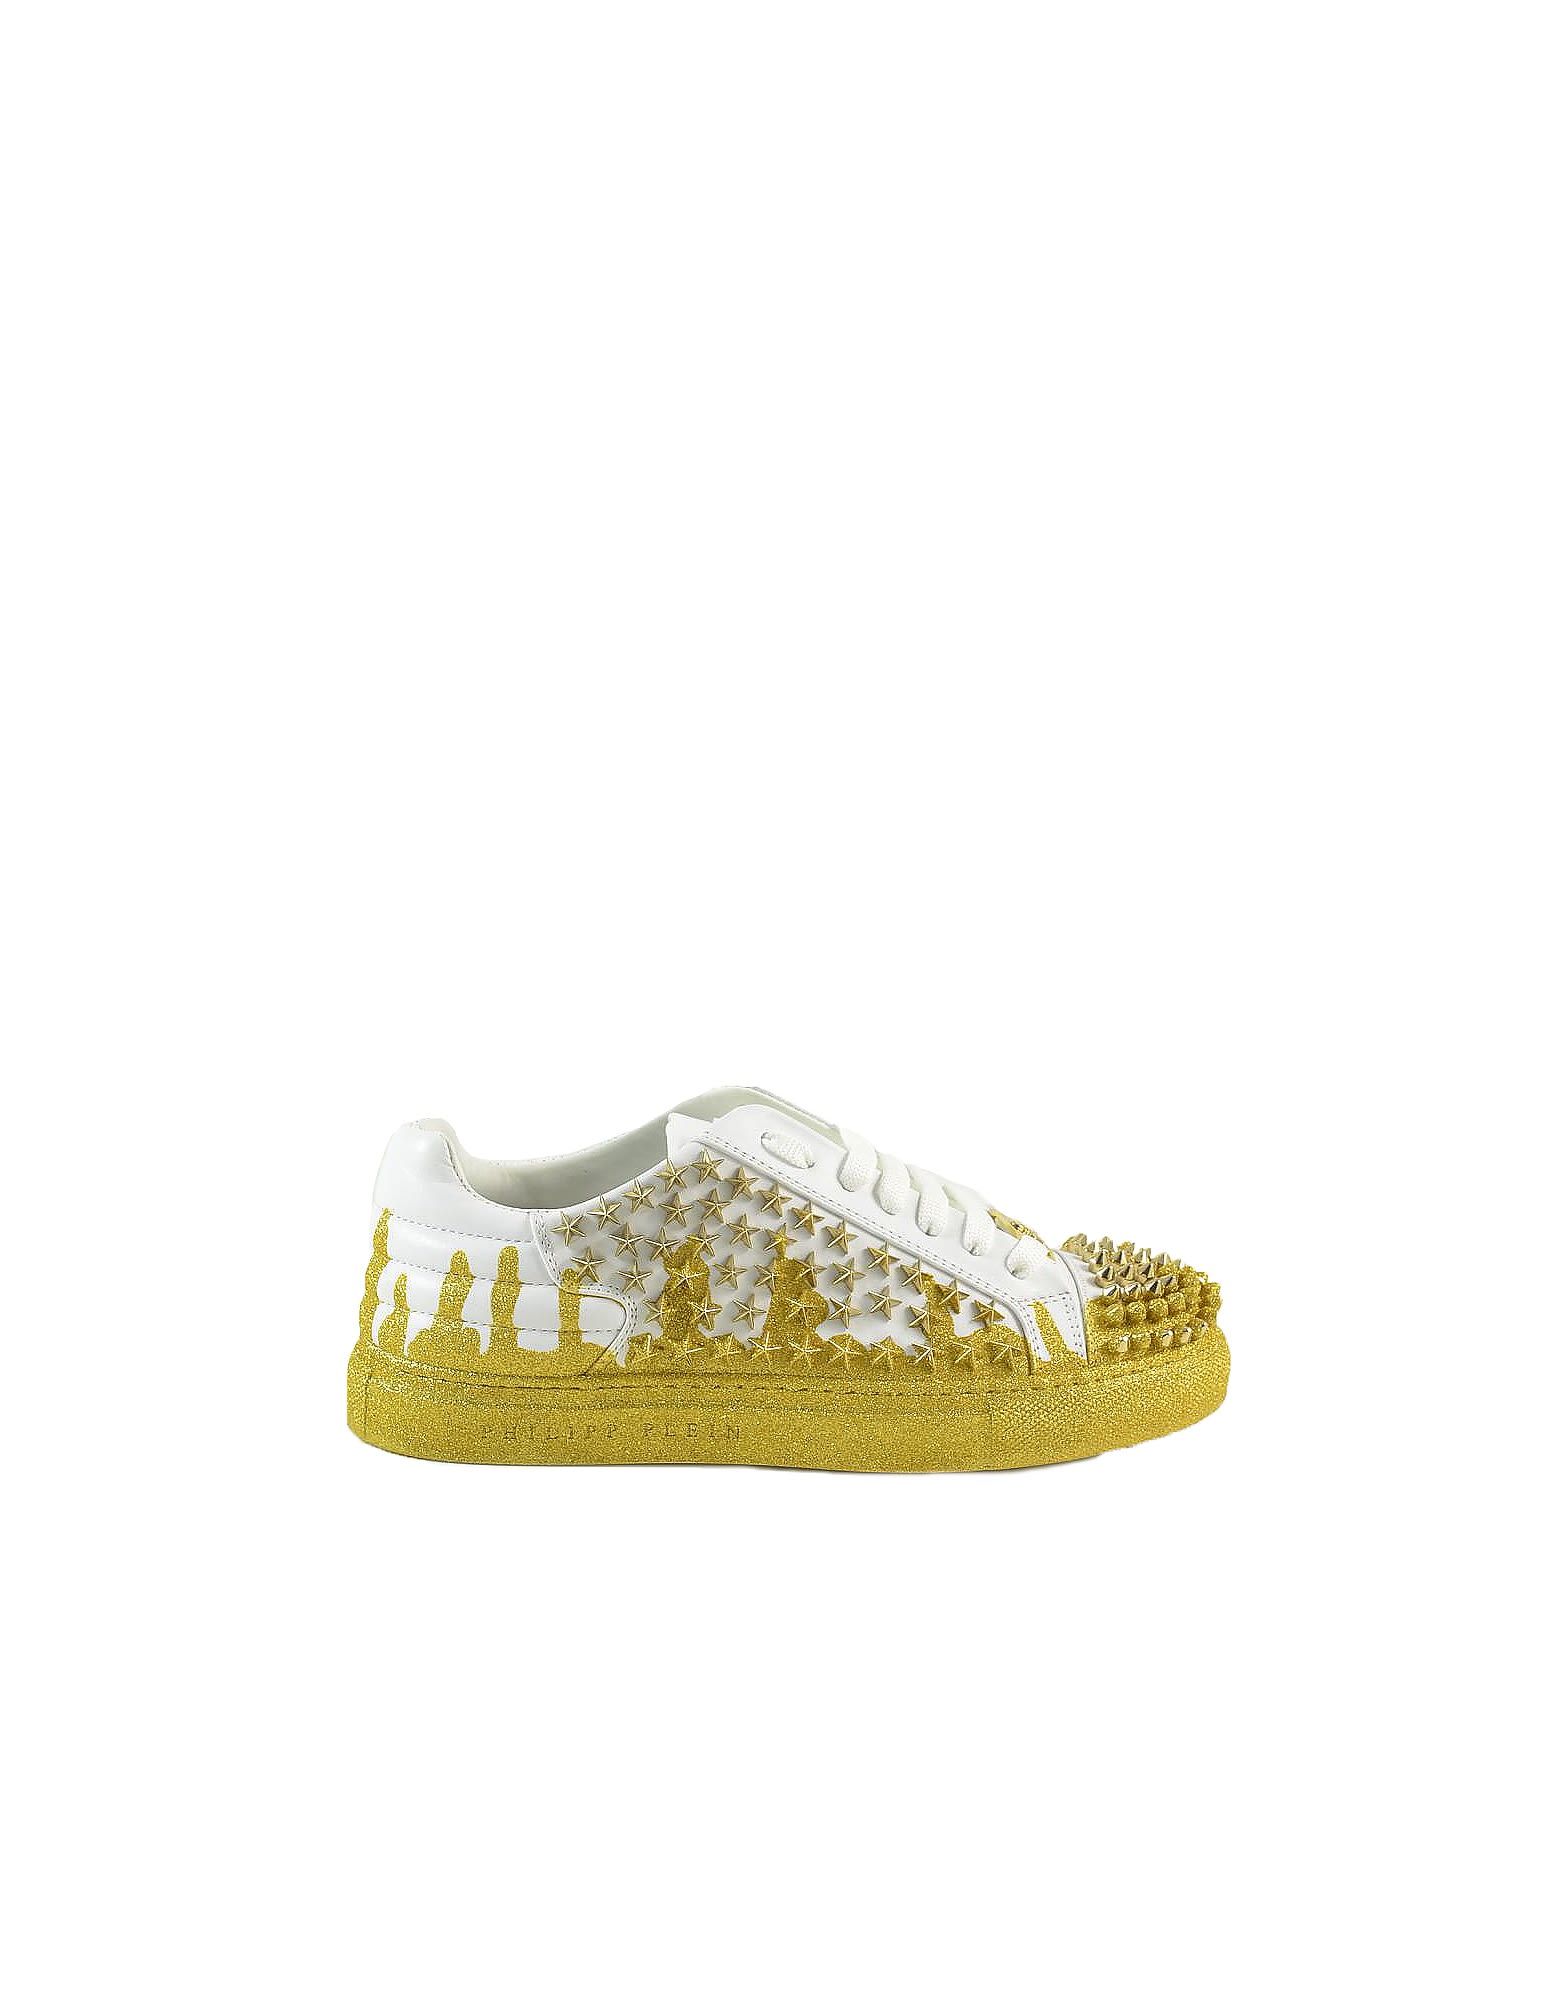 Philipp Plein White And Gold Stars Studded Sneakers